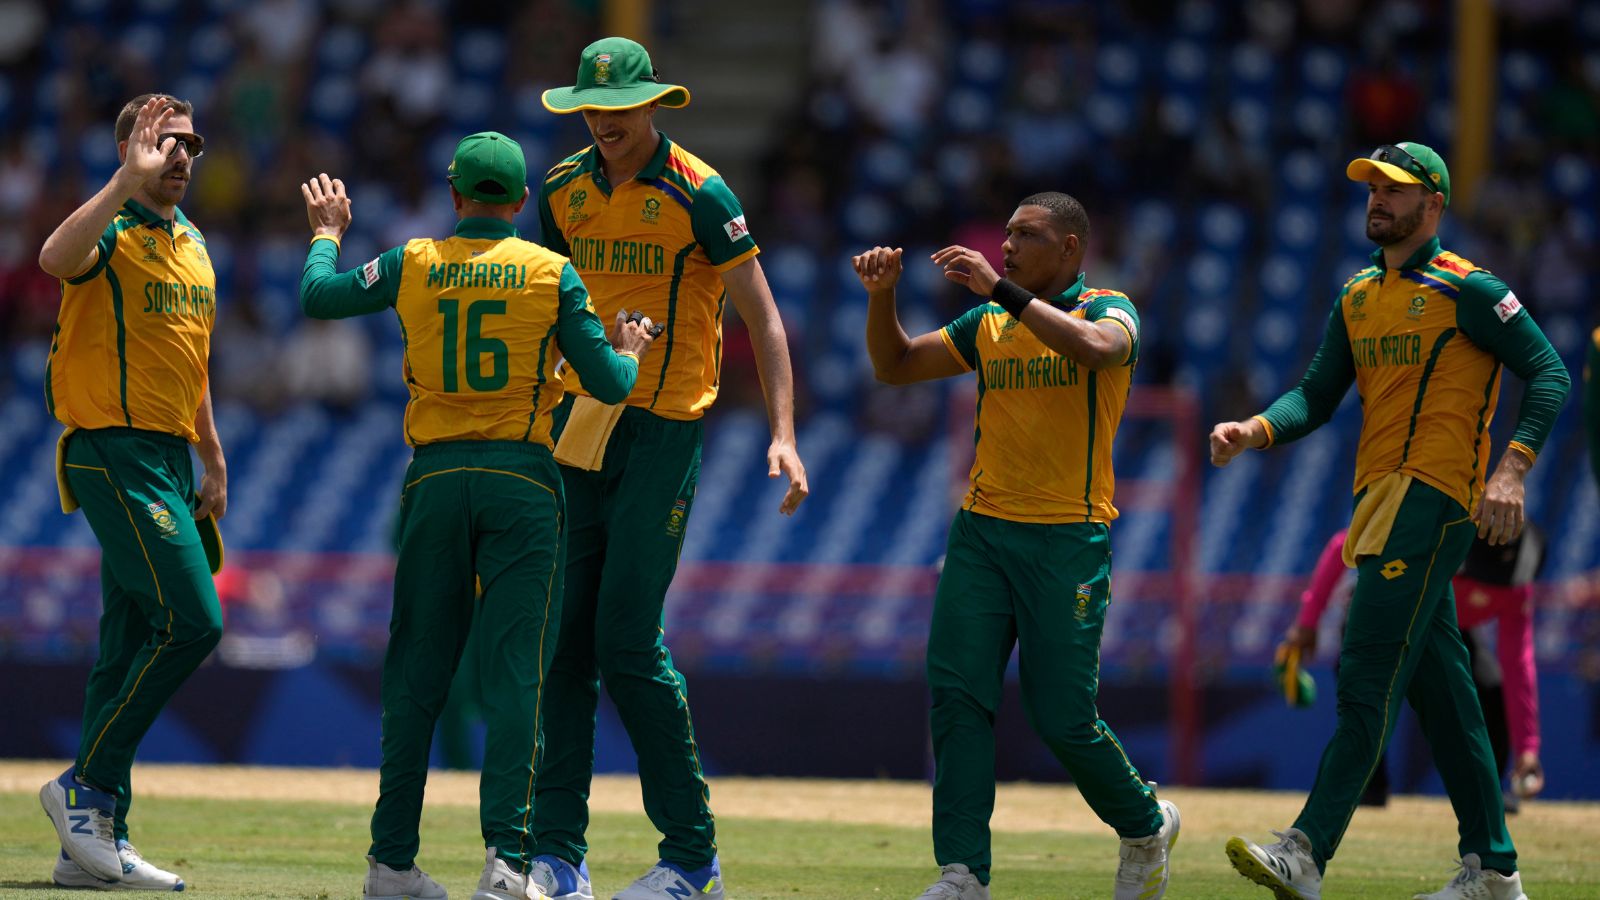 ‘Good thing is South Africa haven’t played their perfect game yet in this World Cup’ – Dean Elgar